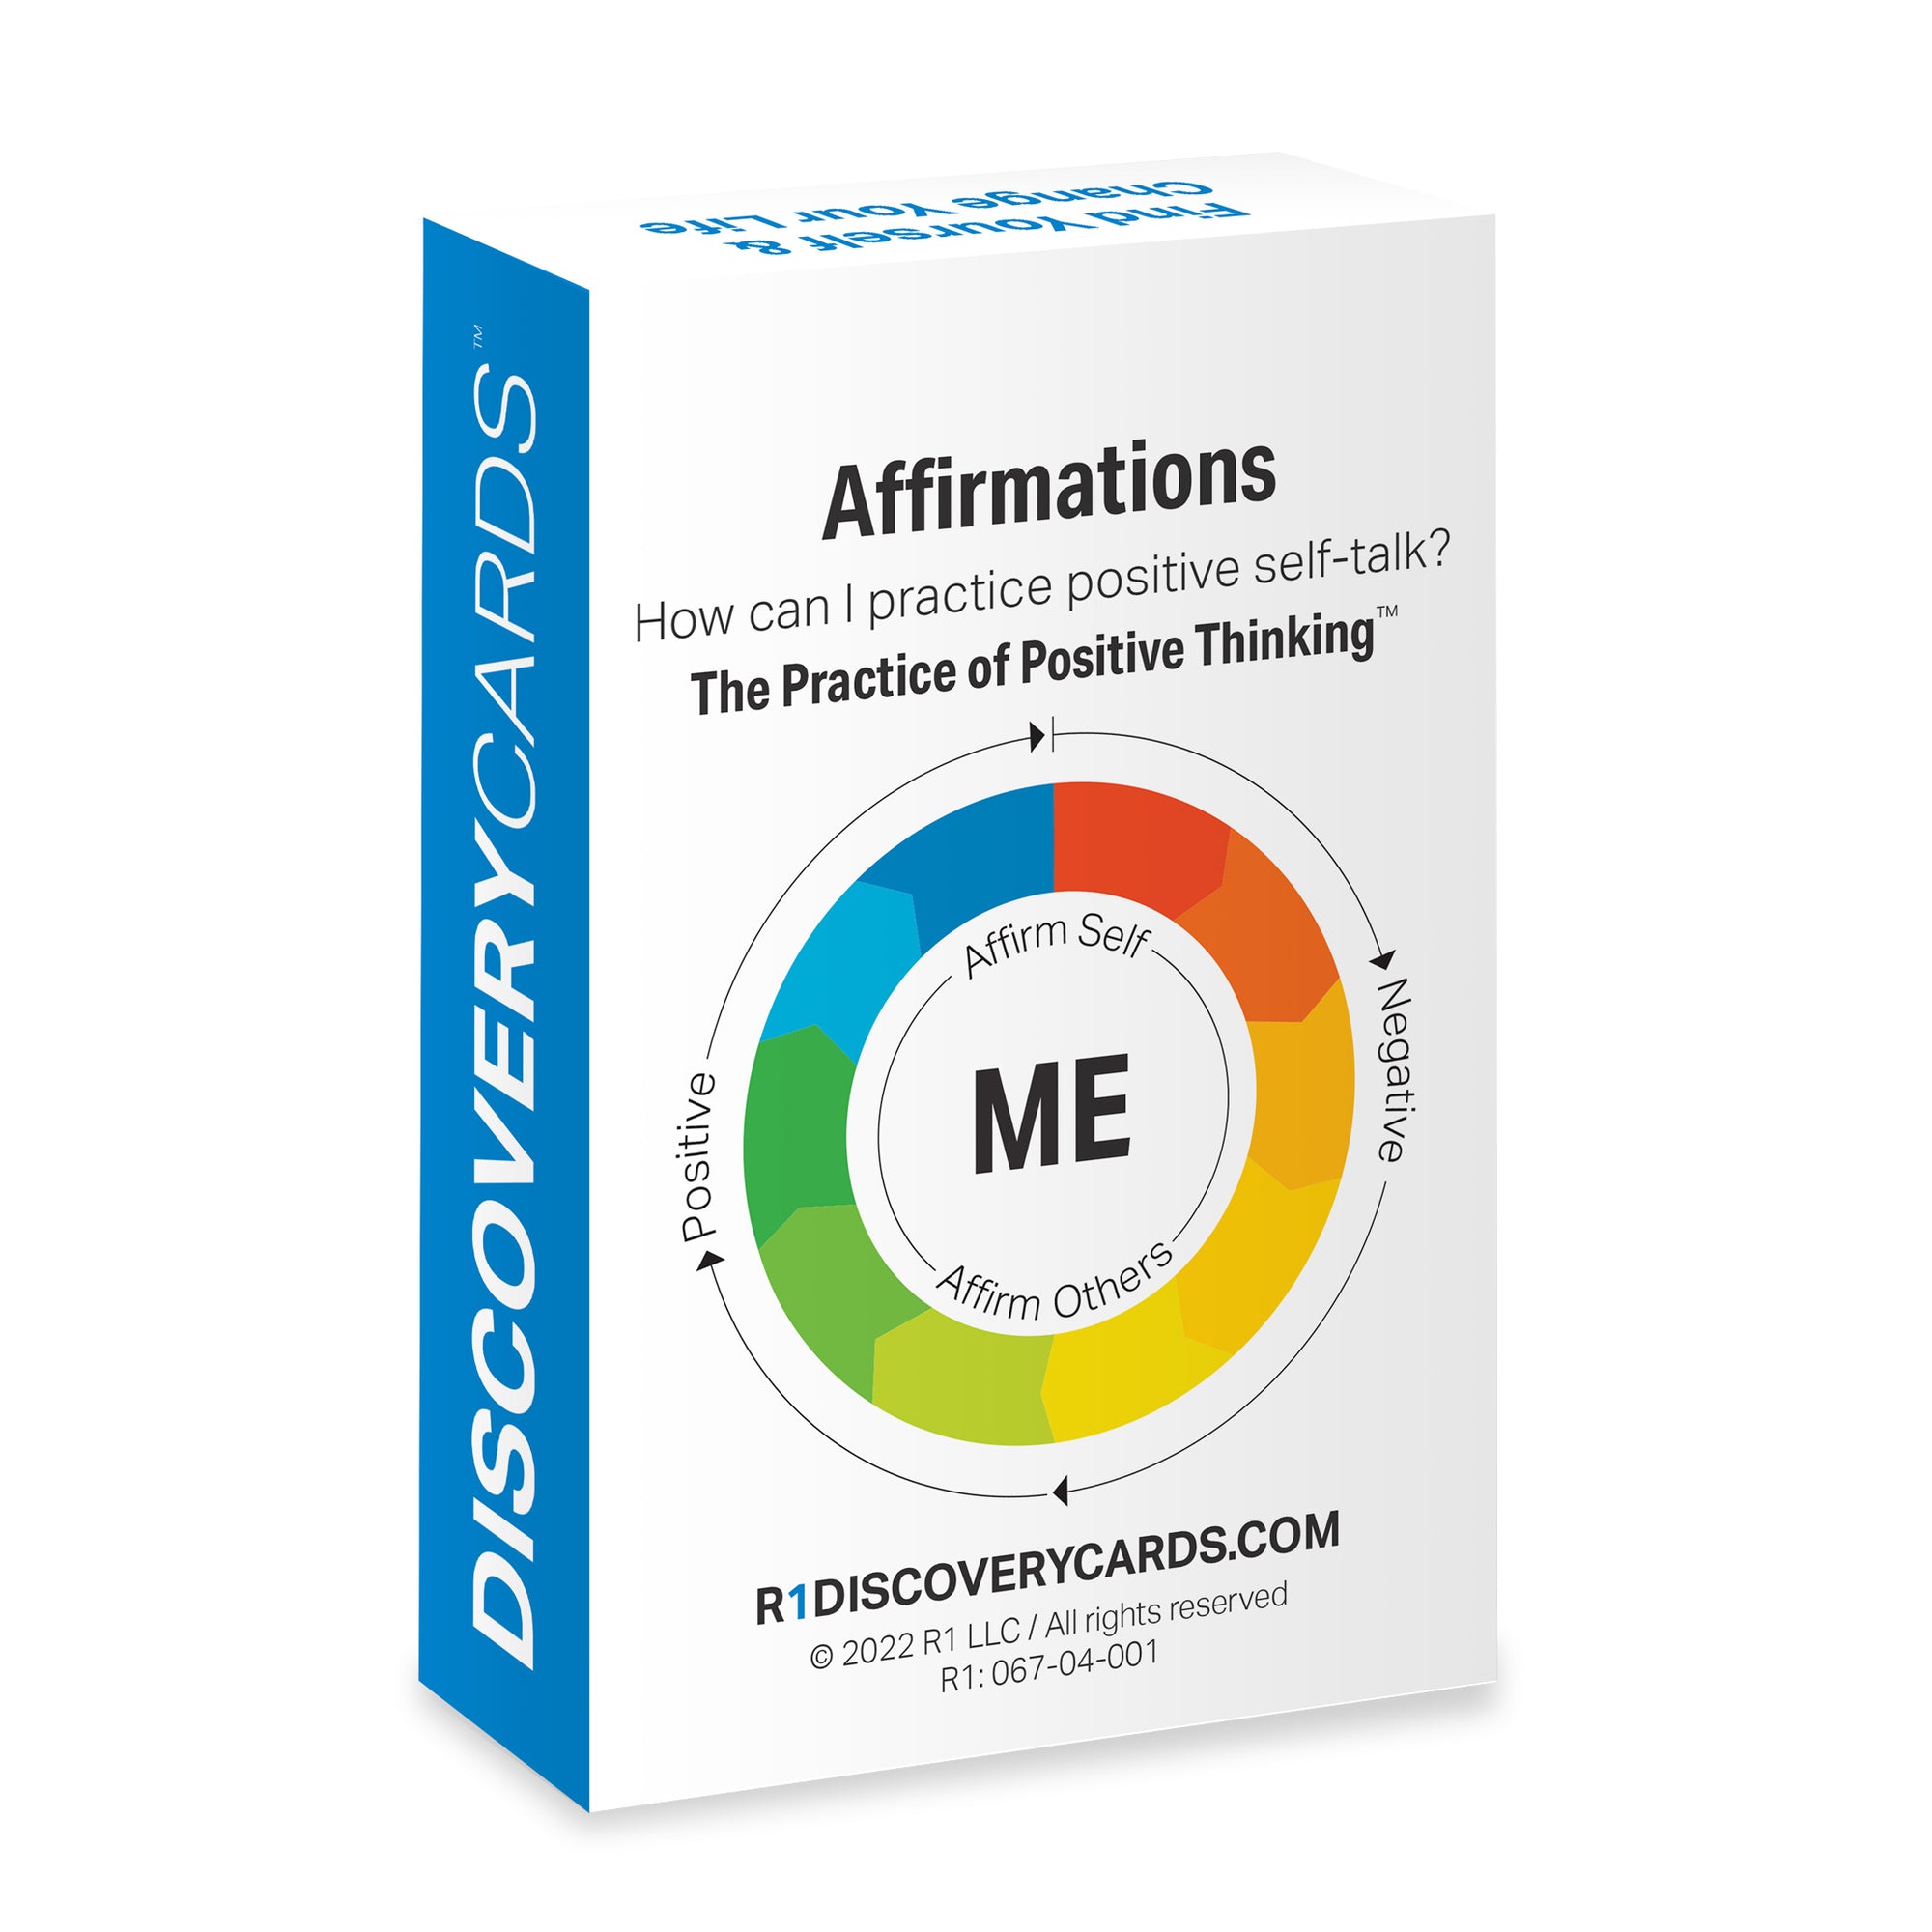 Affirmations Discovery Cards Value Pack — 6 decks